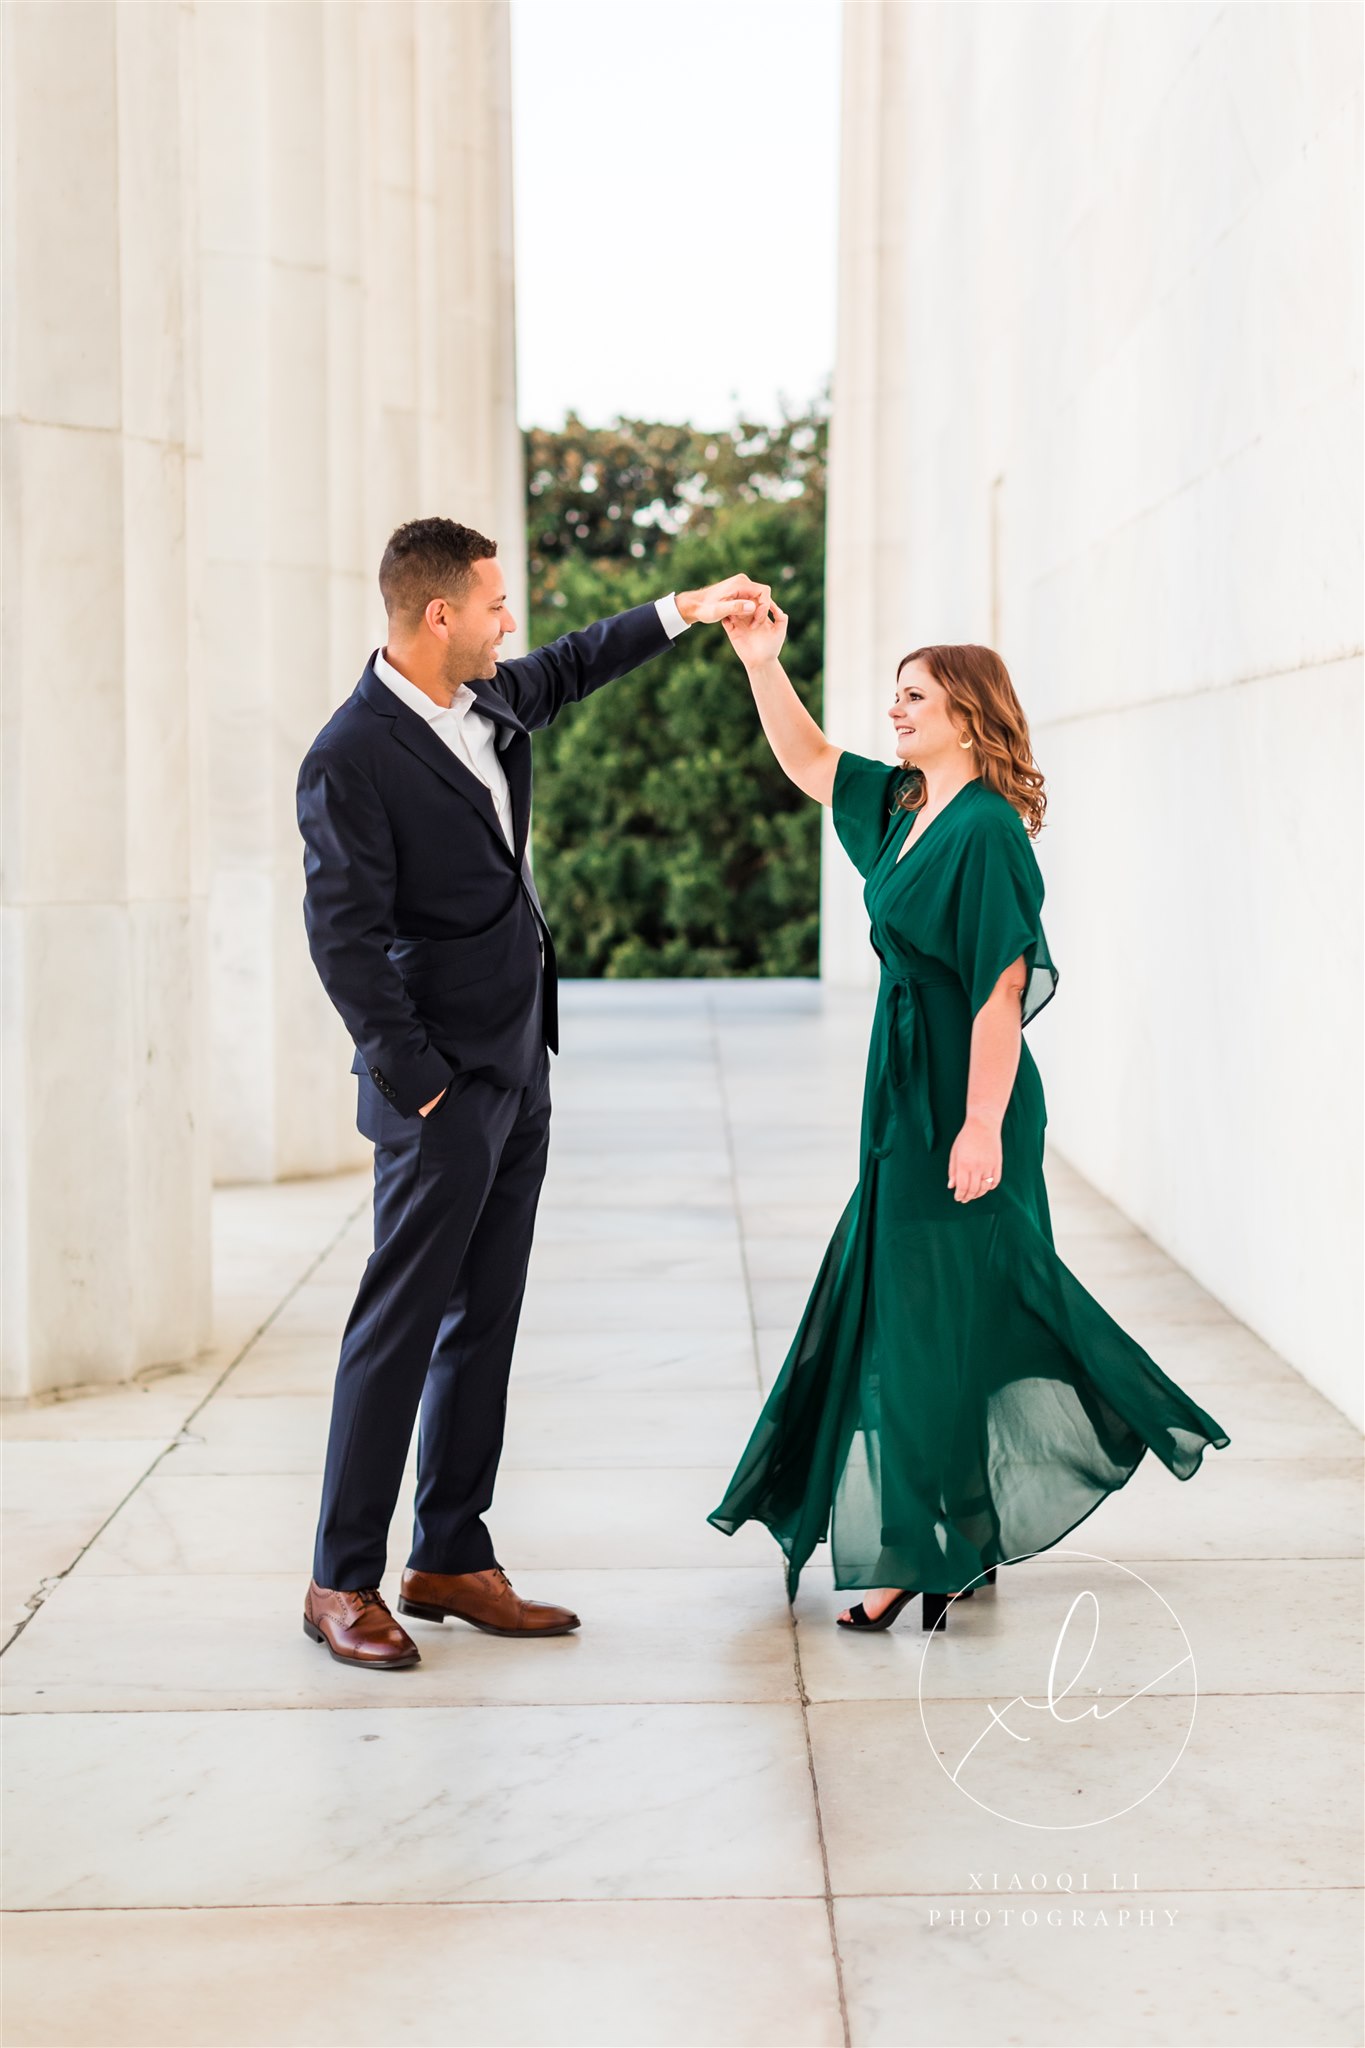 man and woman dressed in formal attire dancing together at Lincoln Memorial